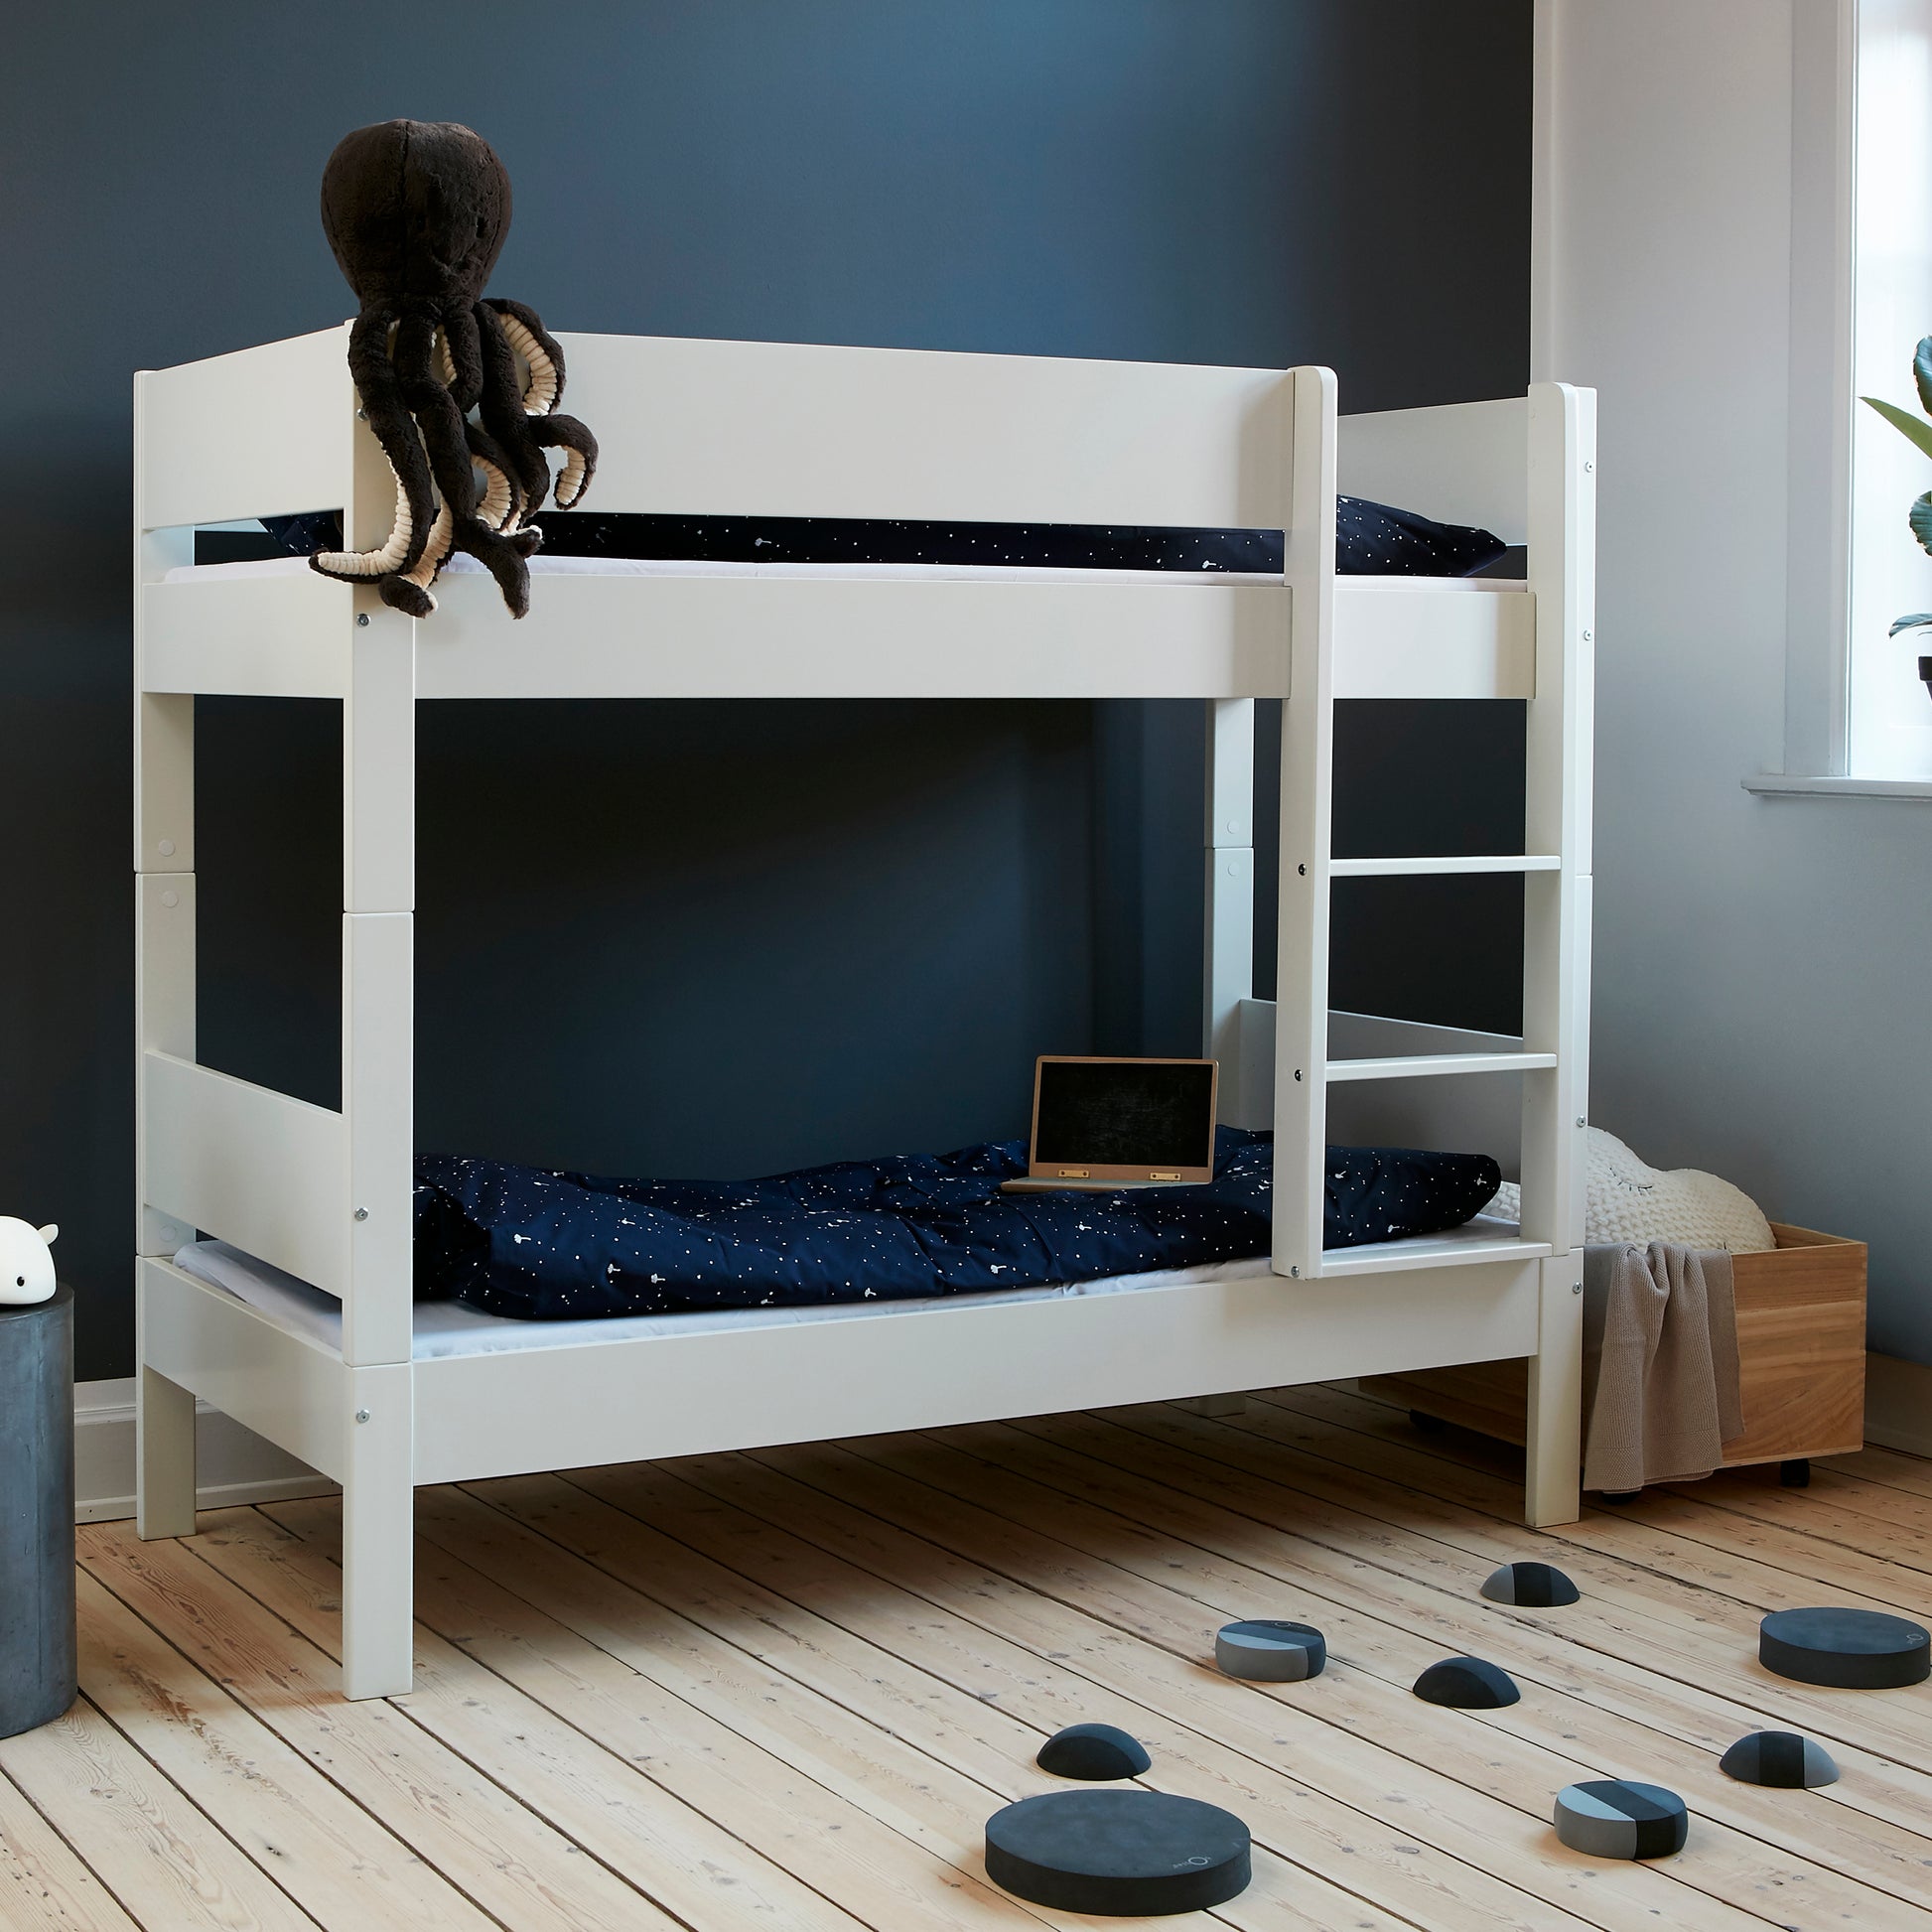 Huxie  Bunk Bed with side and back rails Including 3/4 safety rail